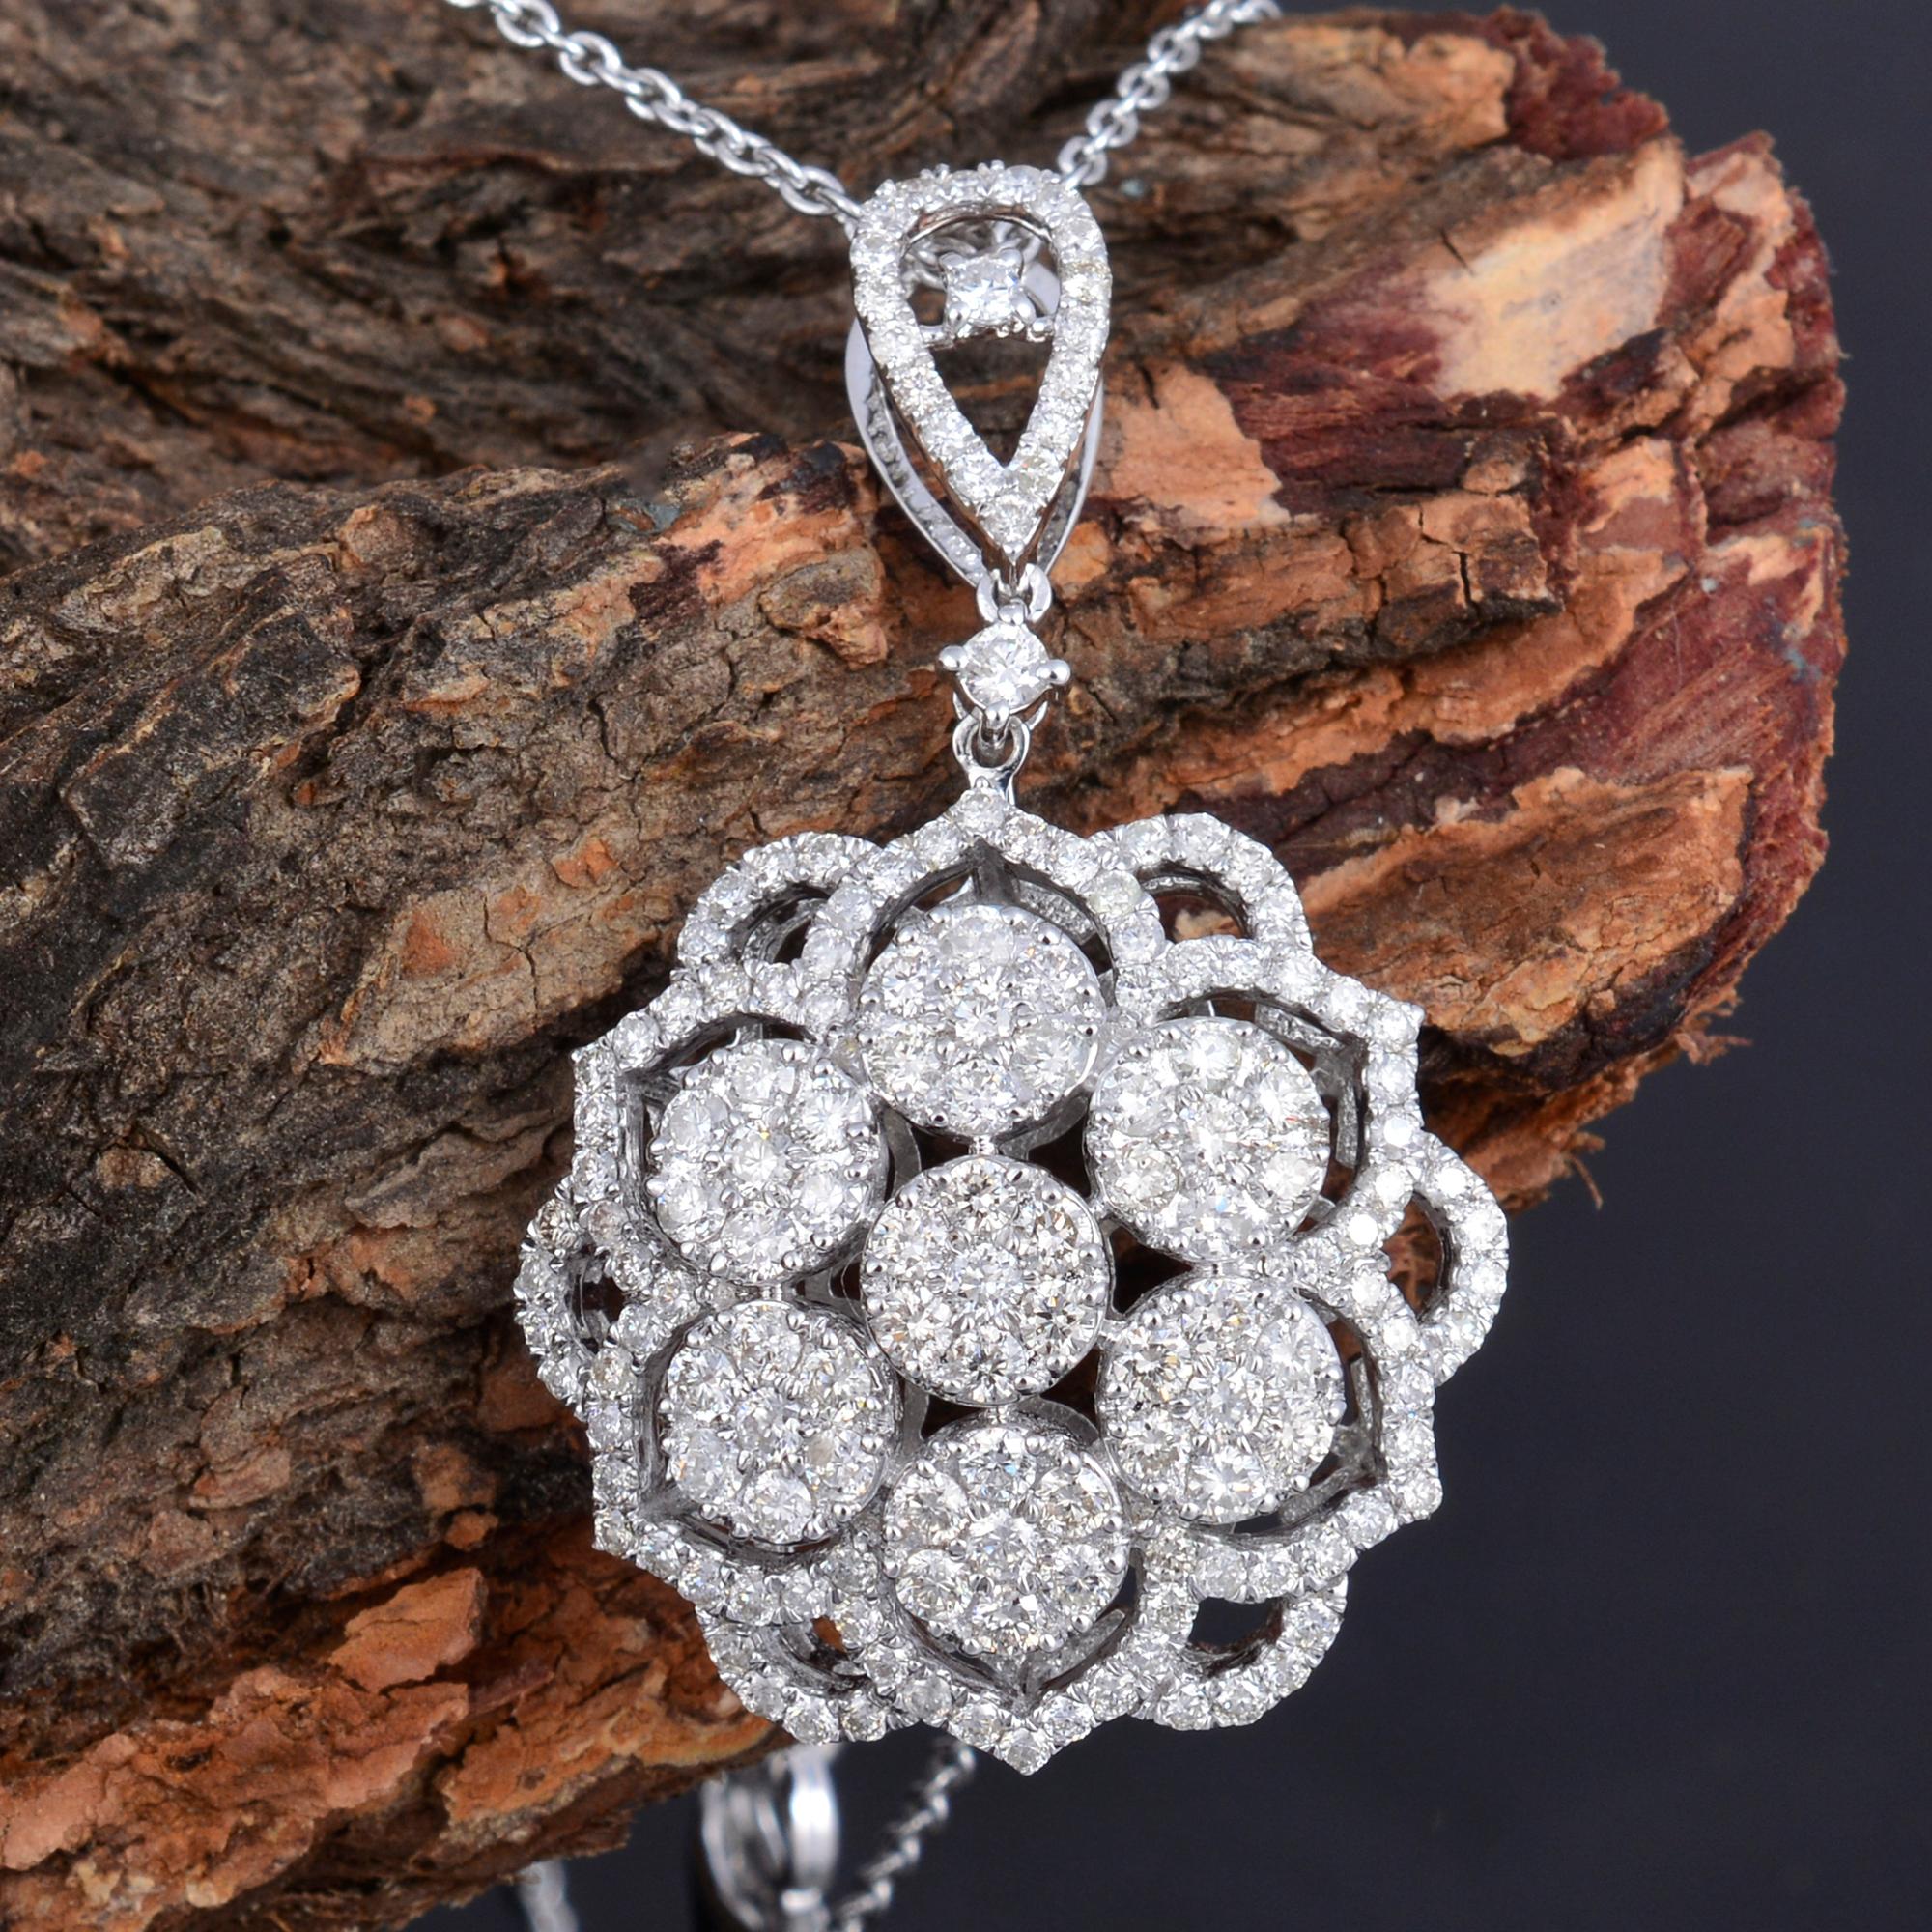 A real 1.80-carat pave diamond floral design pendant necklace, meticulously crafted in 18-karat white gold. The pendant delicately hangs from an 18-karat white gold chain.

Item Code :- CNF-22029
Gross Wt. :- 4.79 gm
18k Solid White Gold Wt. :- 4.43